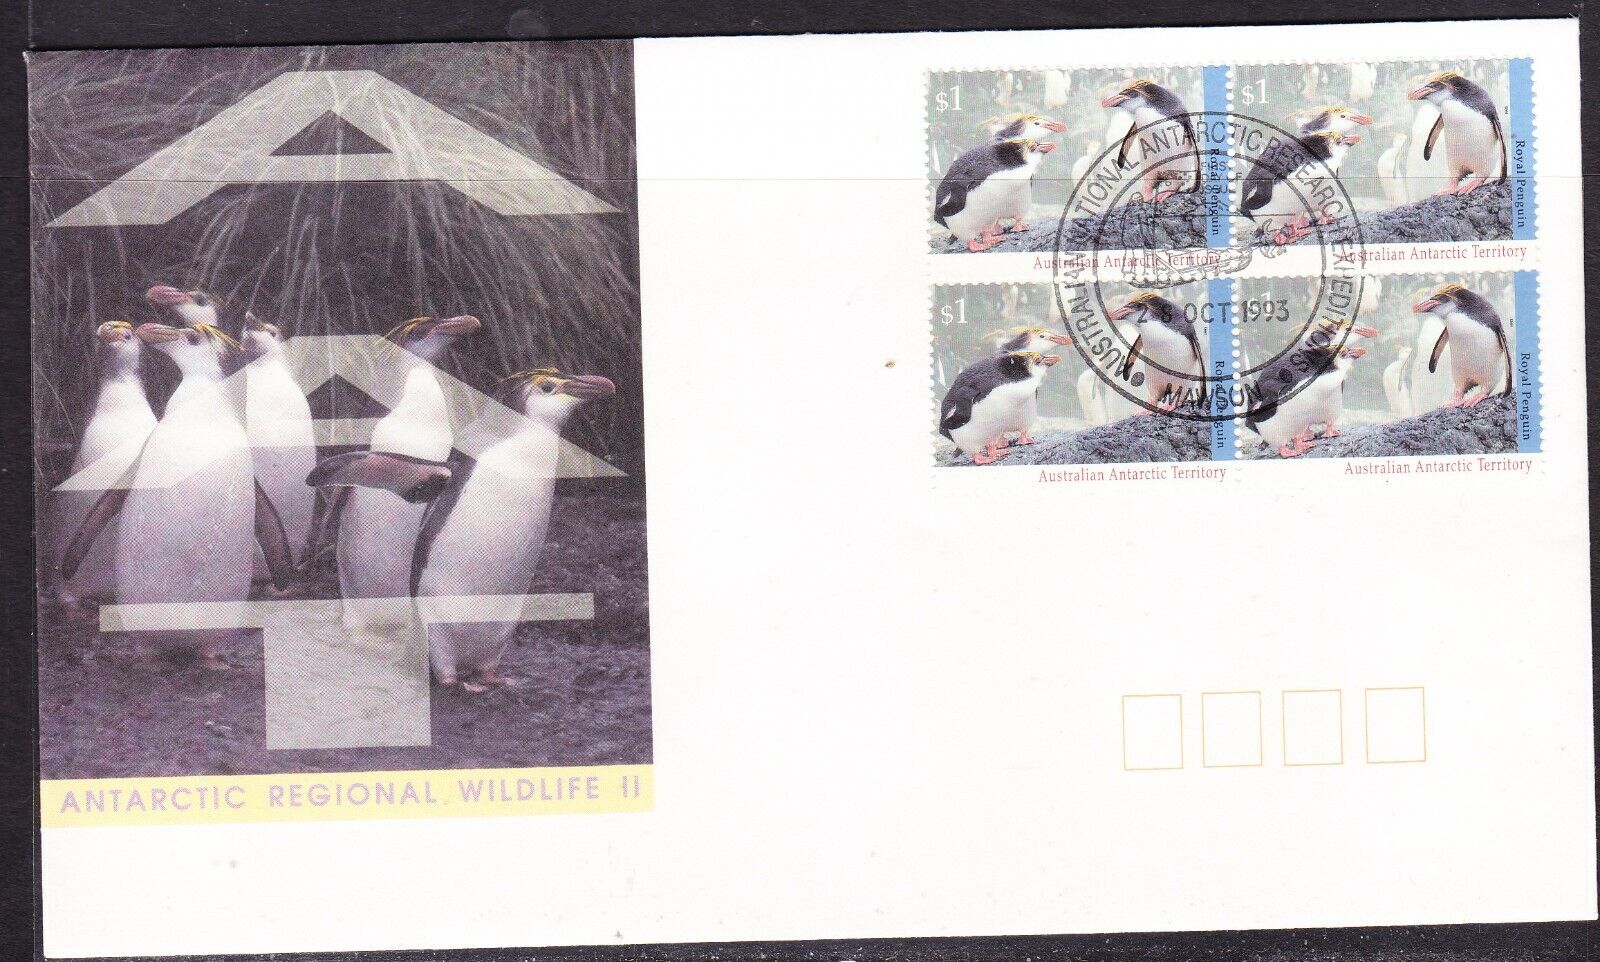 Australia AAT 1993 - $1.00 Royal 4 Day Penguin Cov Block First Shipping included Popular overseas